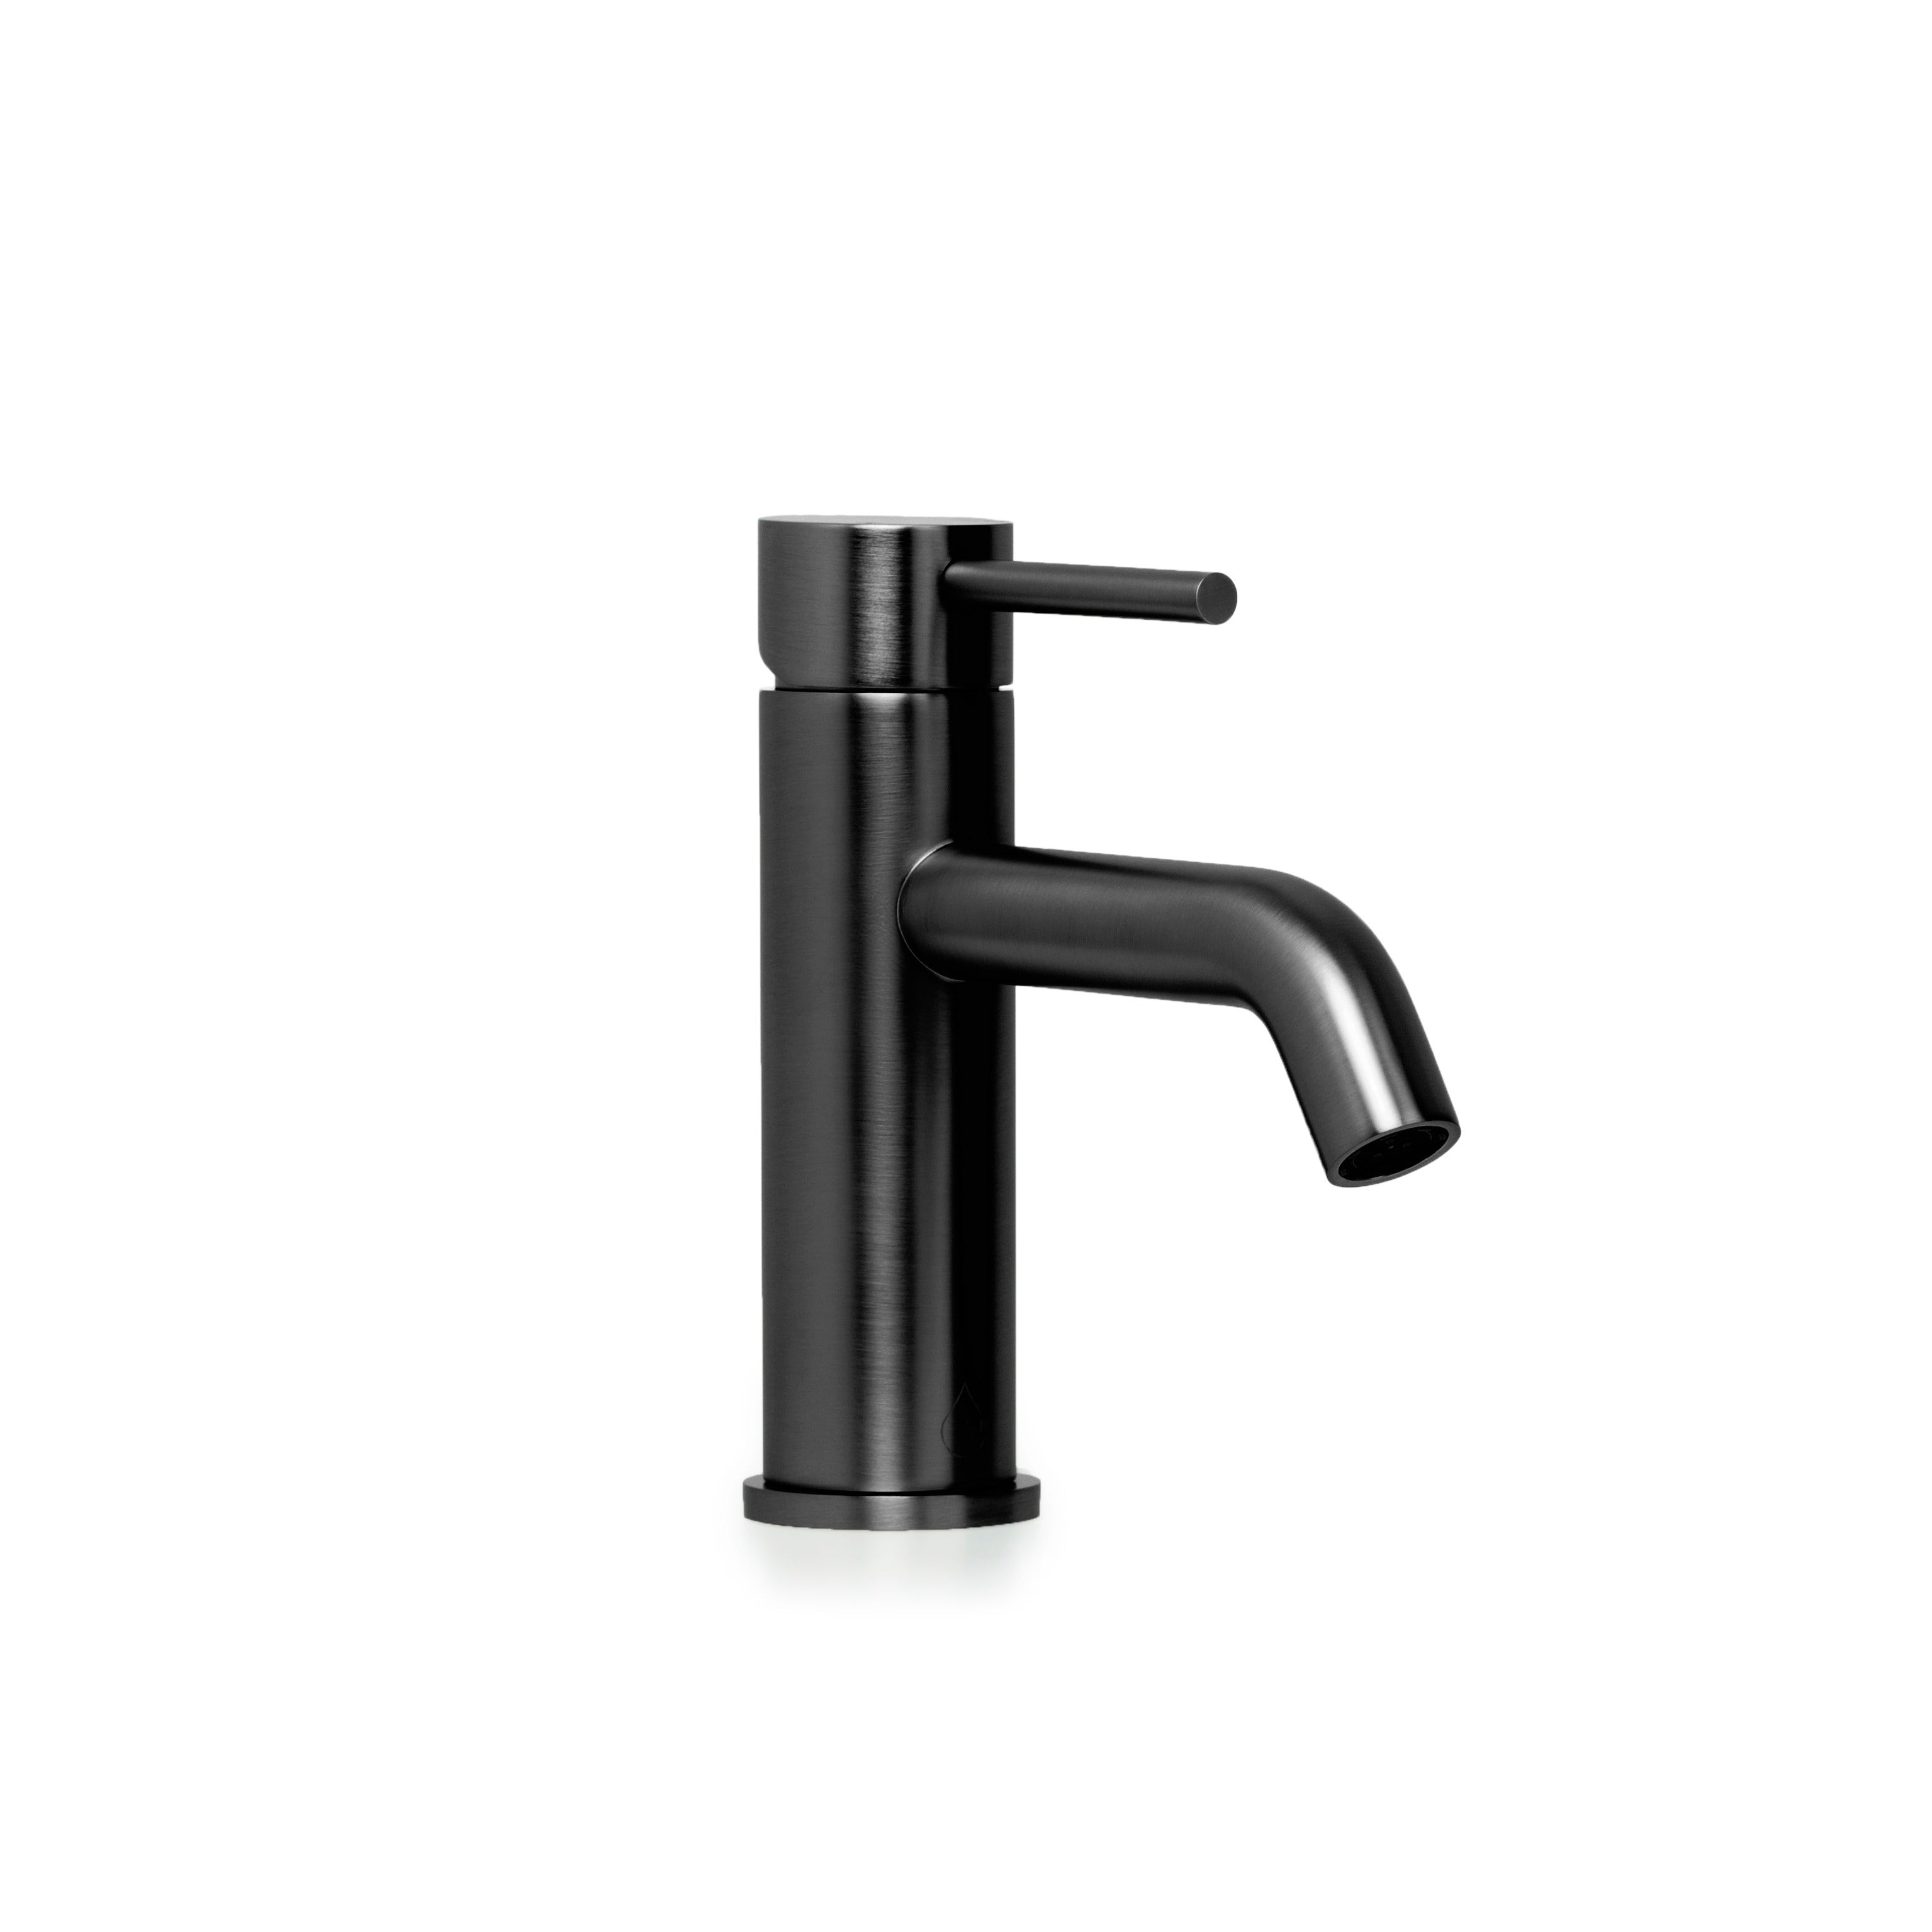 Bondi Pin Lever Basin Mixer with Curved Spout in Brushed Gunmetal